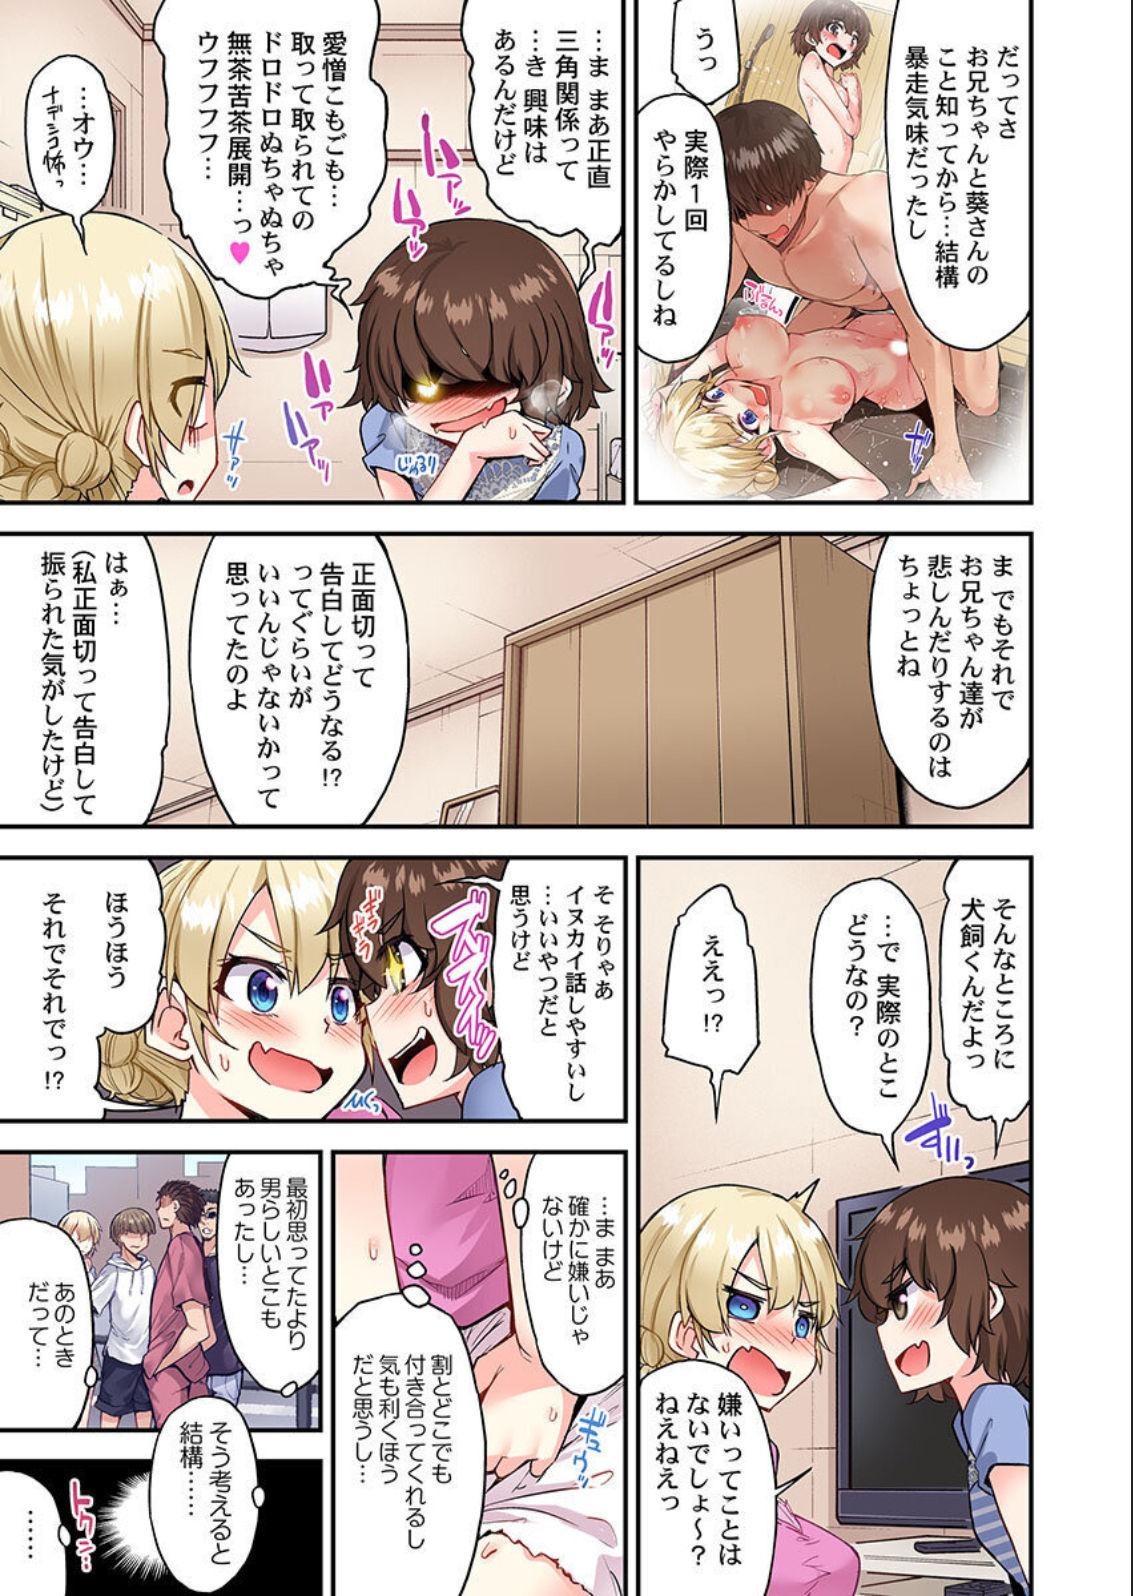 Cunnilingus Traditional Job Of Washing Girls' Body Ch. 45-51 and brand new CH. 57 Submissive - Page 6